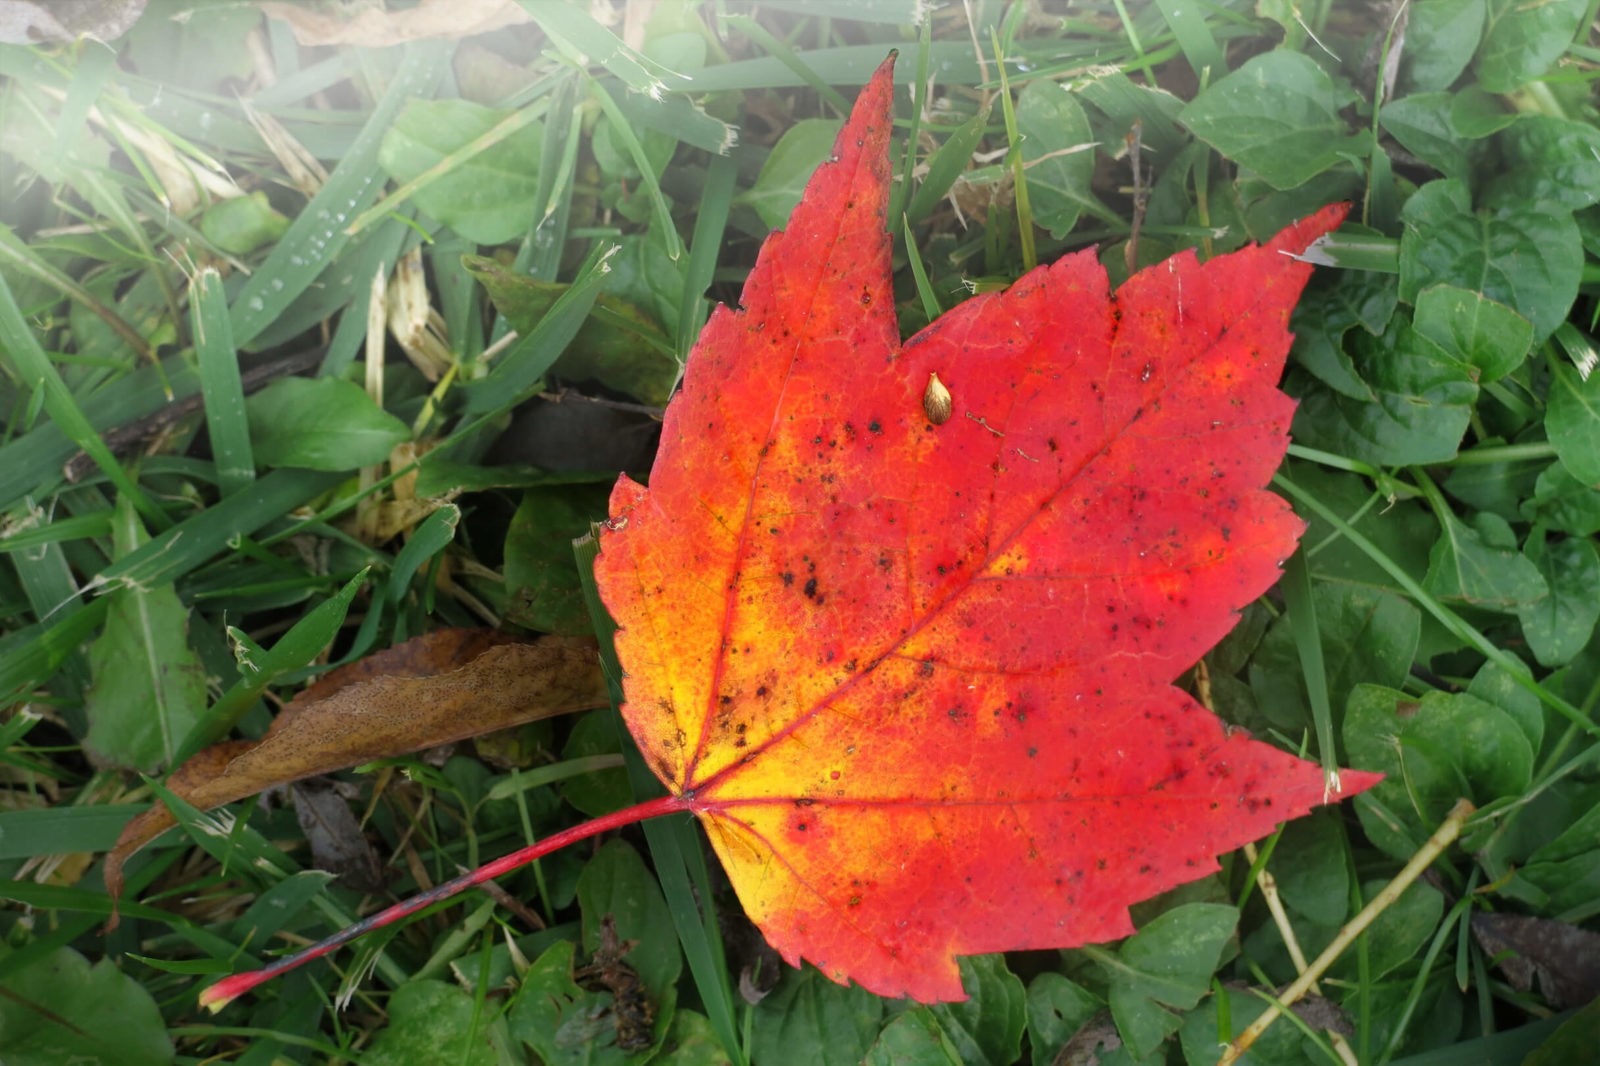 Robin Botie of Ithaca, New York, finds a lone red leaf in her yard.